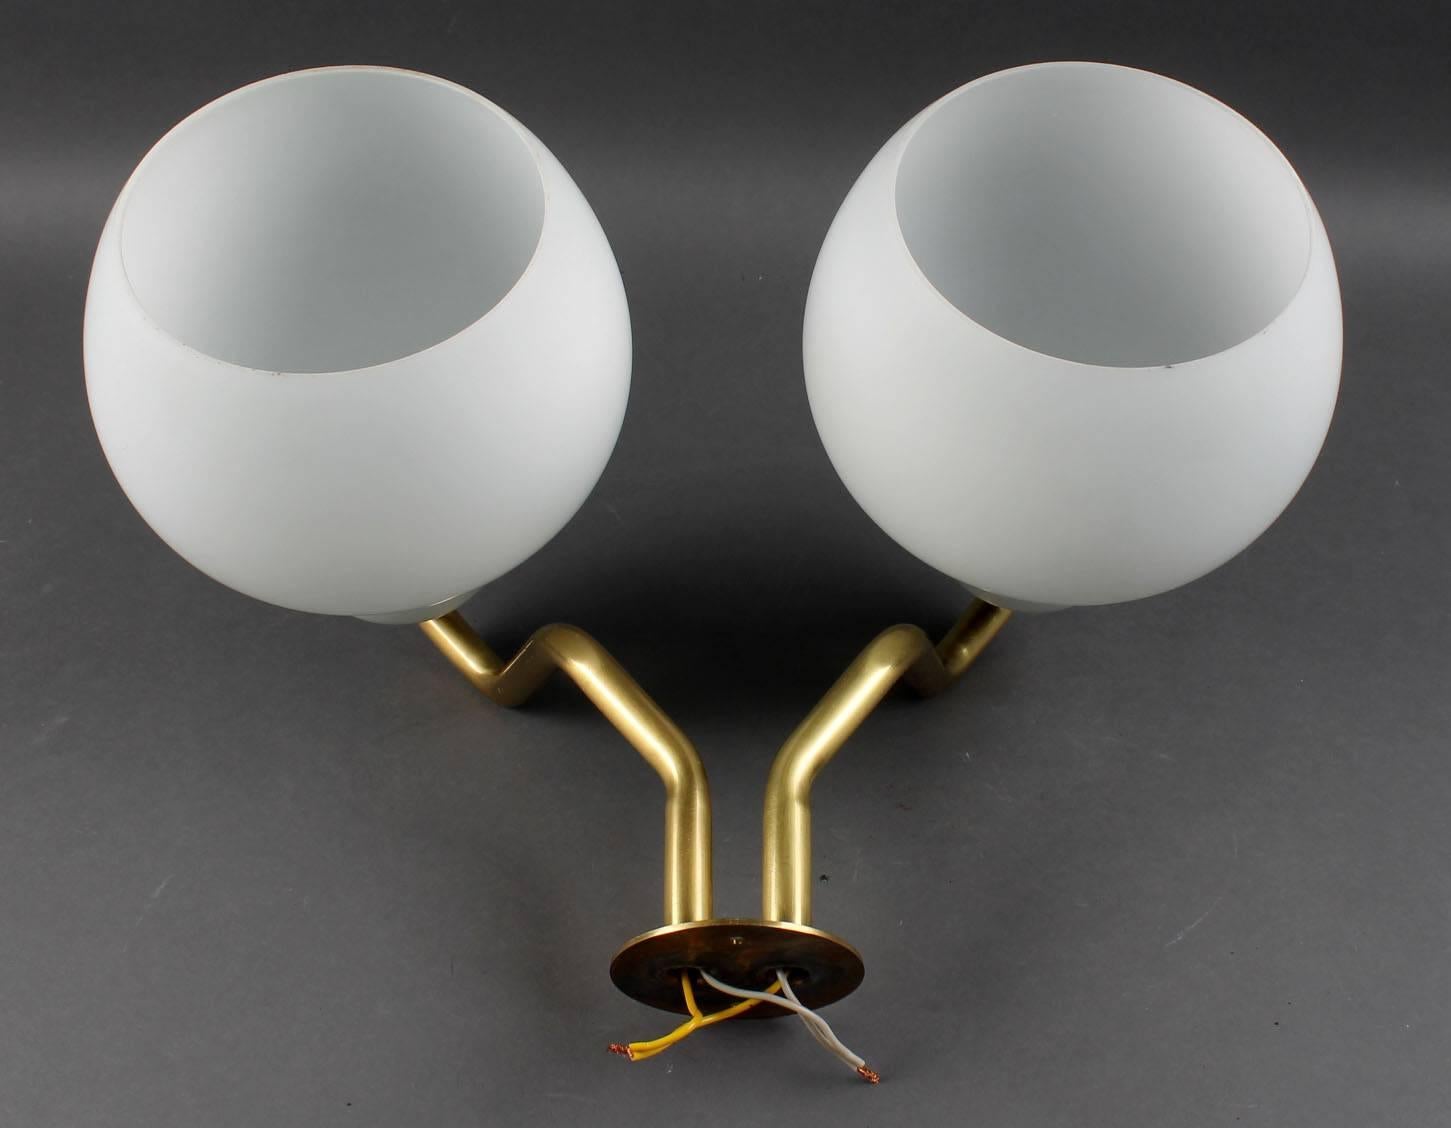 Wall lamp designed in 1955 by Vilhelm Lauritzen for by Louis Poulsen in 1950s.
Brass construction with hand blow opaline glass shades.
Perfect original condition.